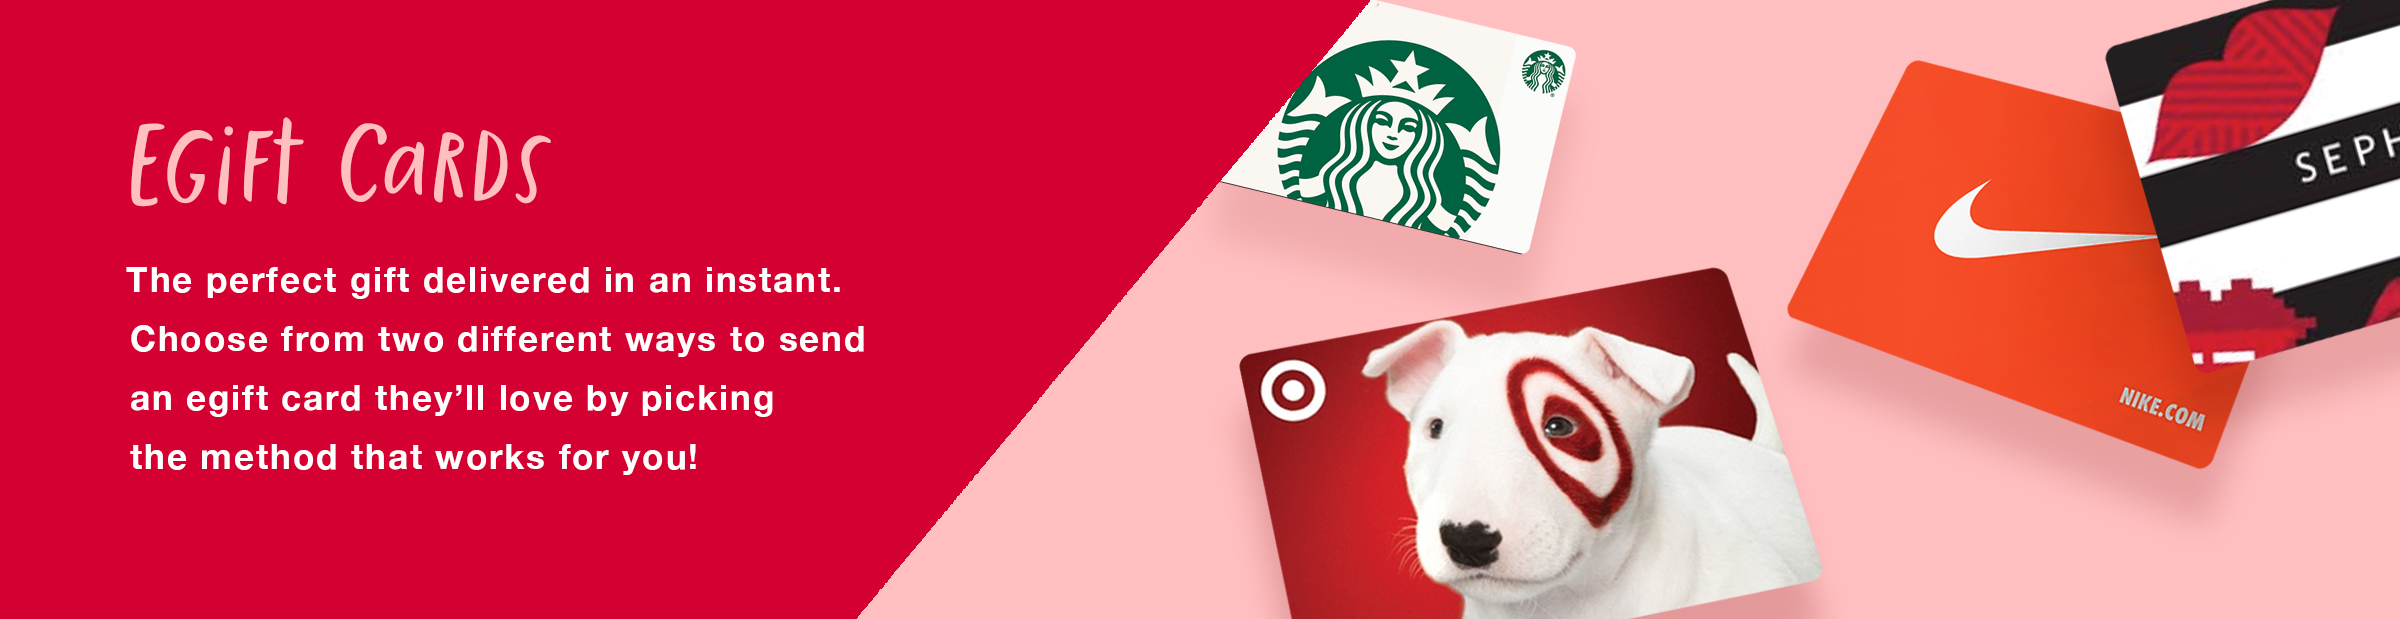 Gift Cards Banner